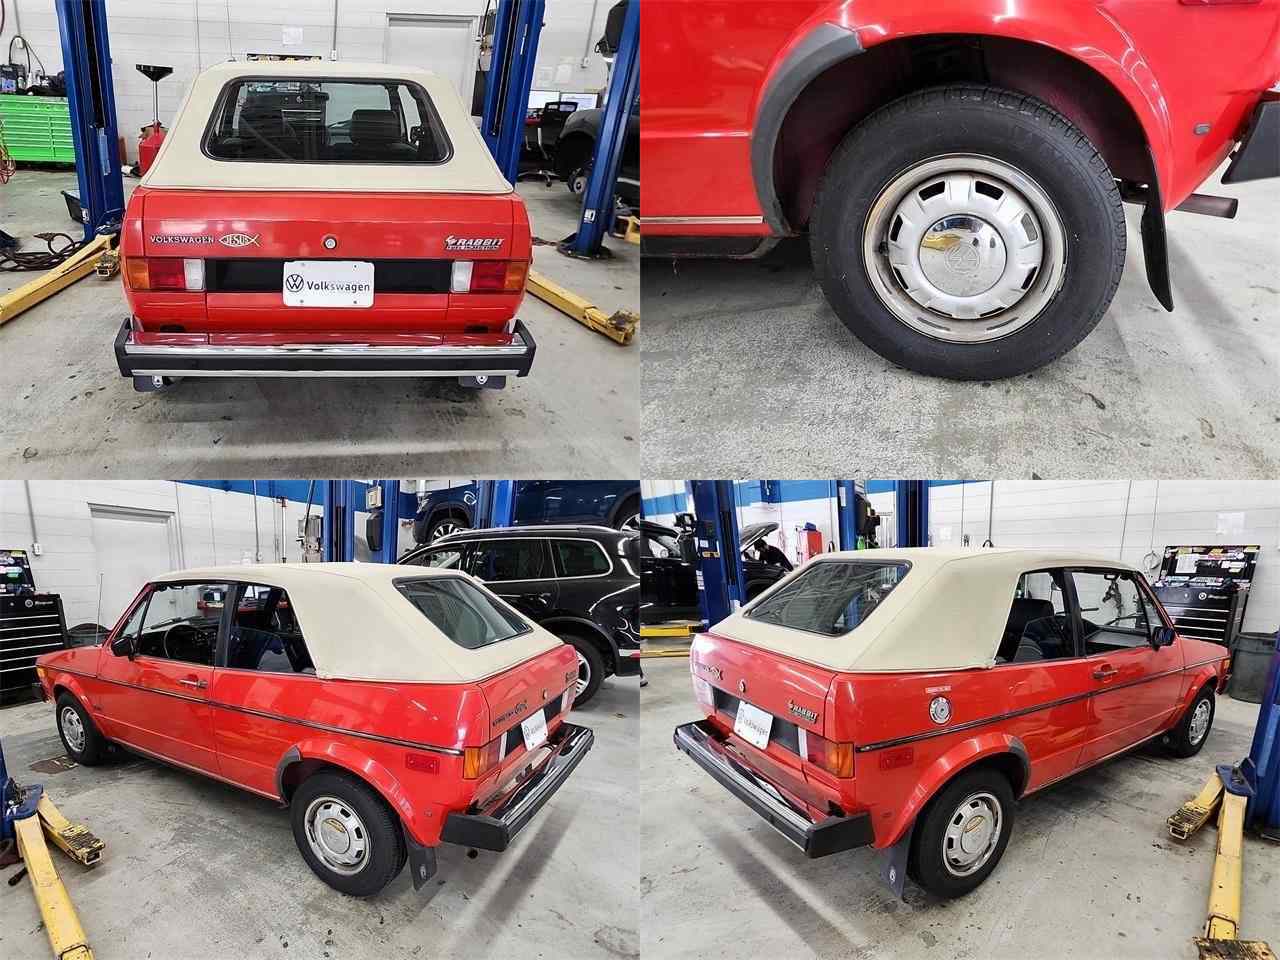 1981 Volkswagen Rabbit Base used for sale usa